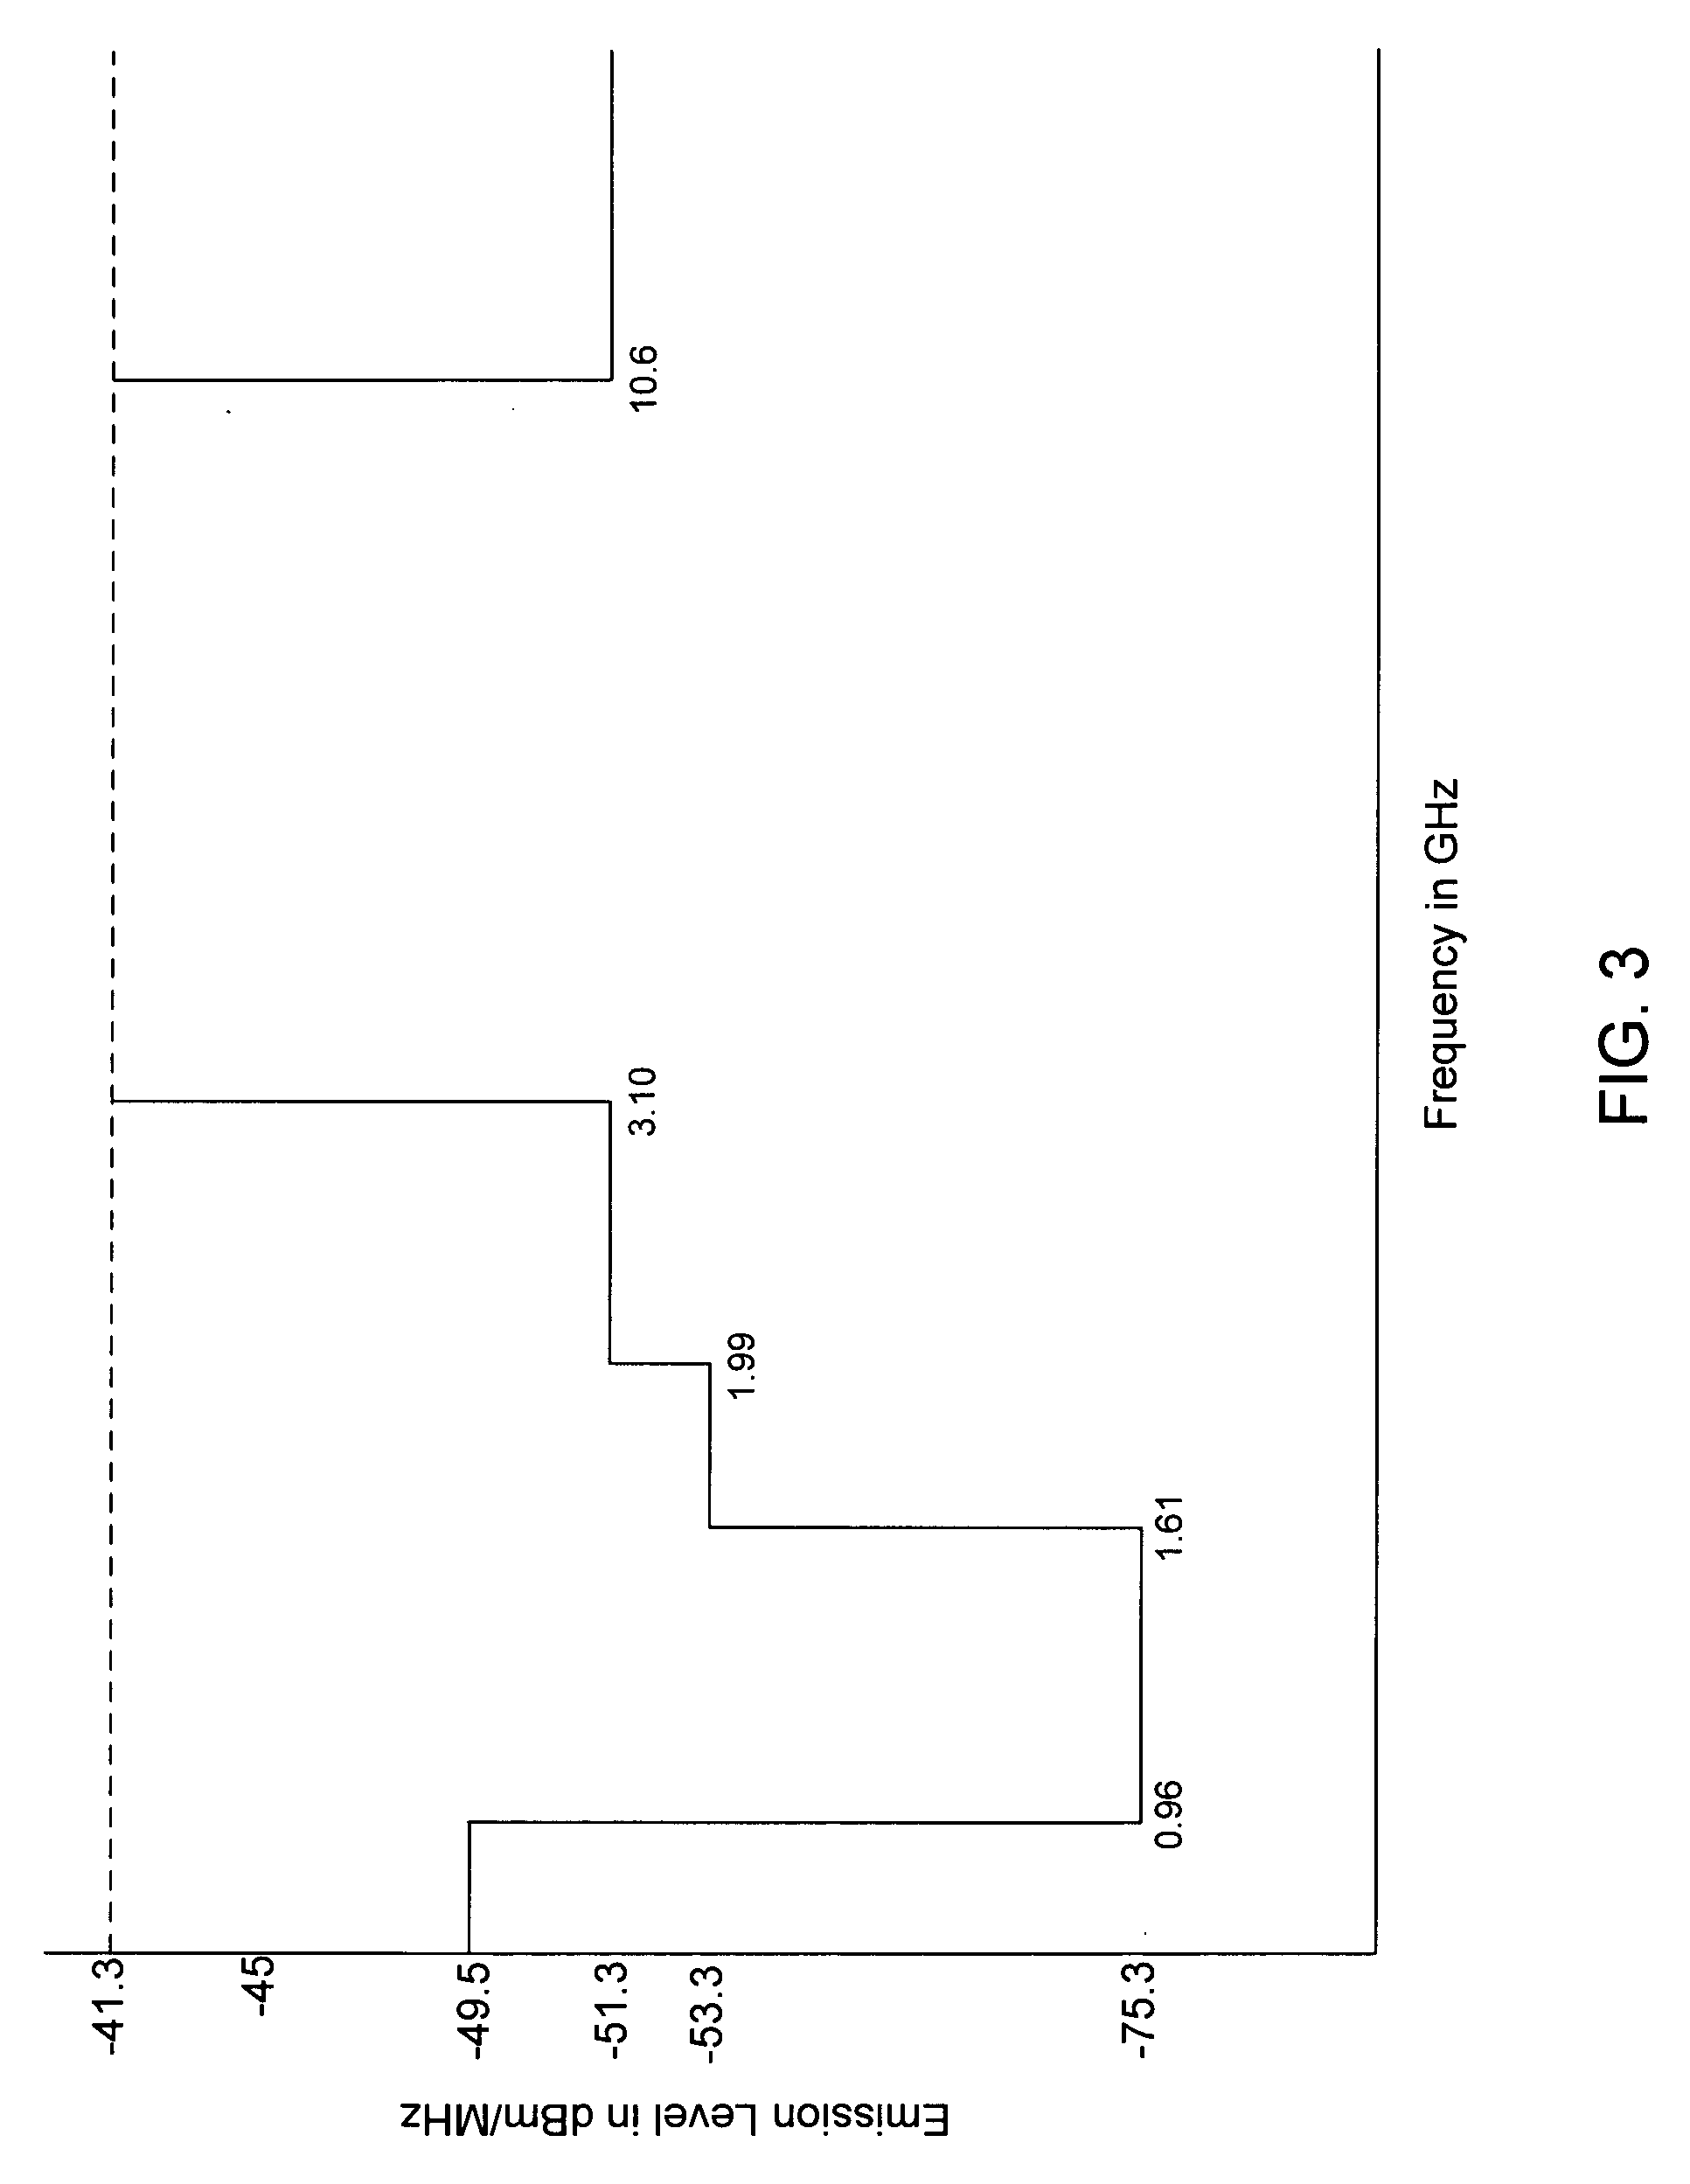 Ultra-wideband communications system and method